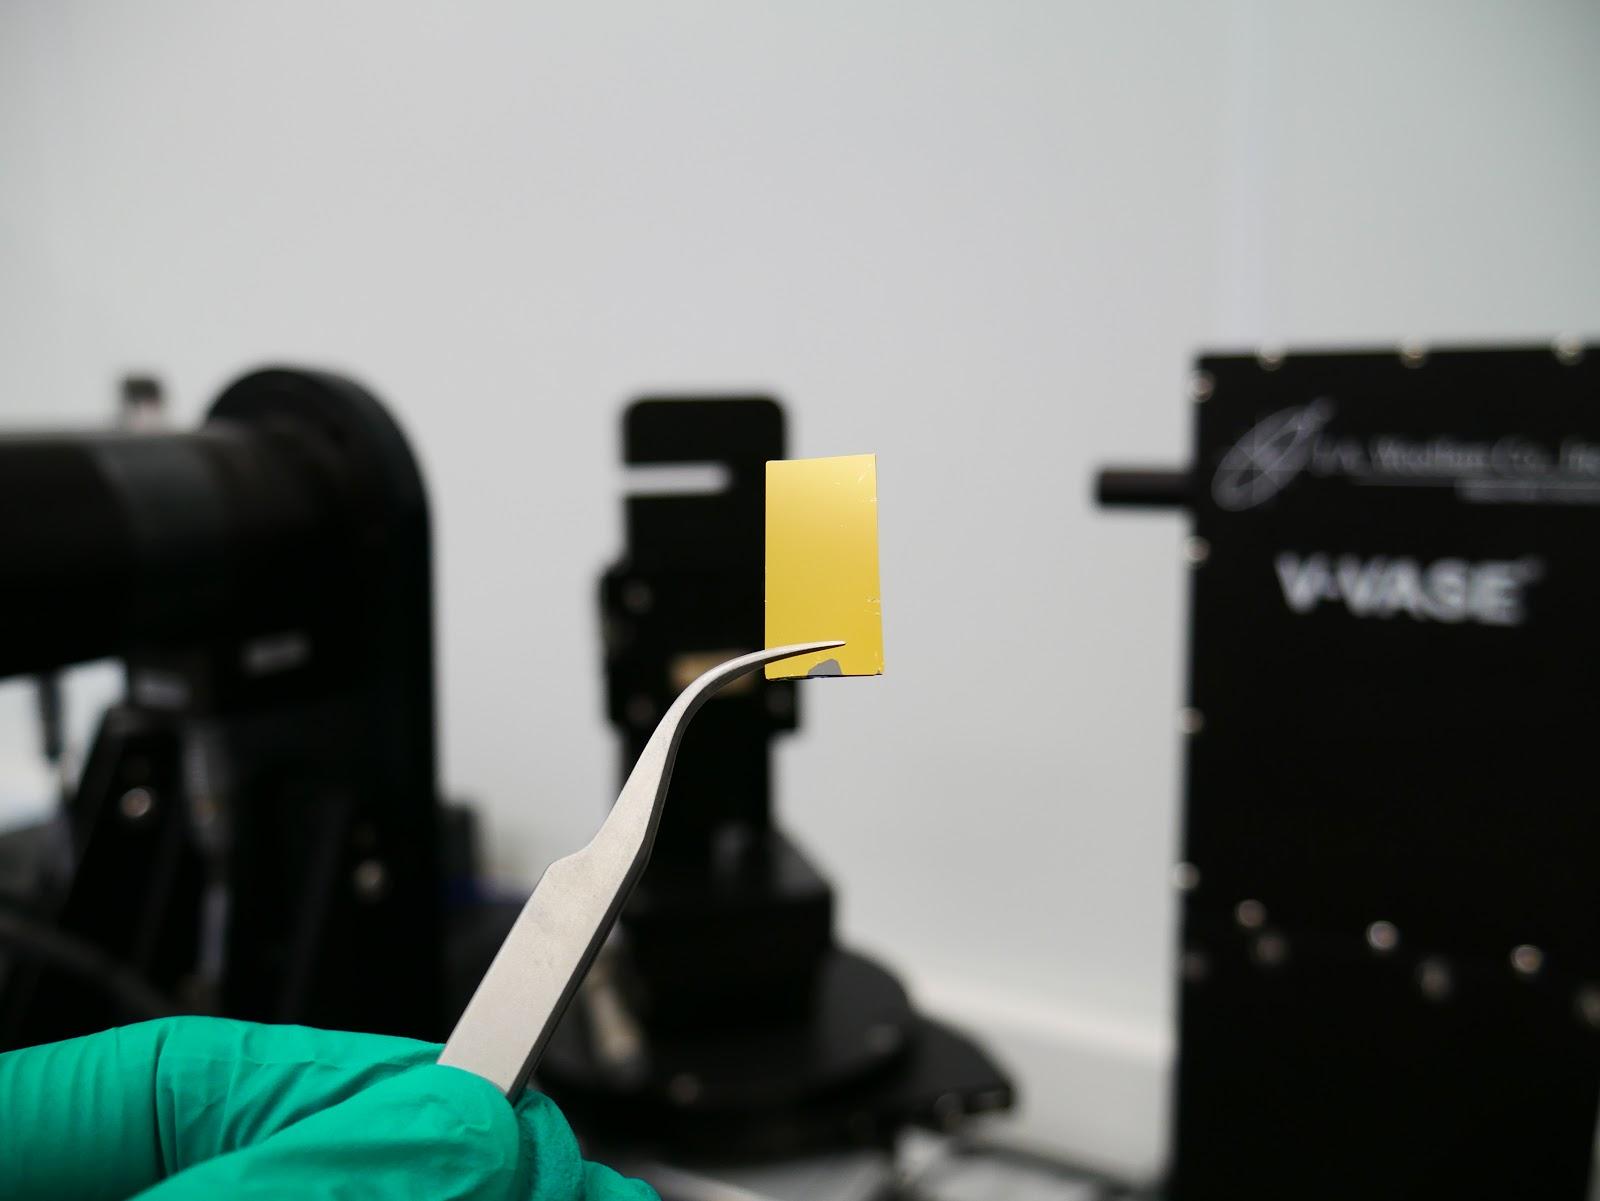 Preparation of a thin gold film sample for spectroscopic ellipsometry measurements